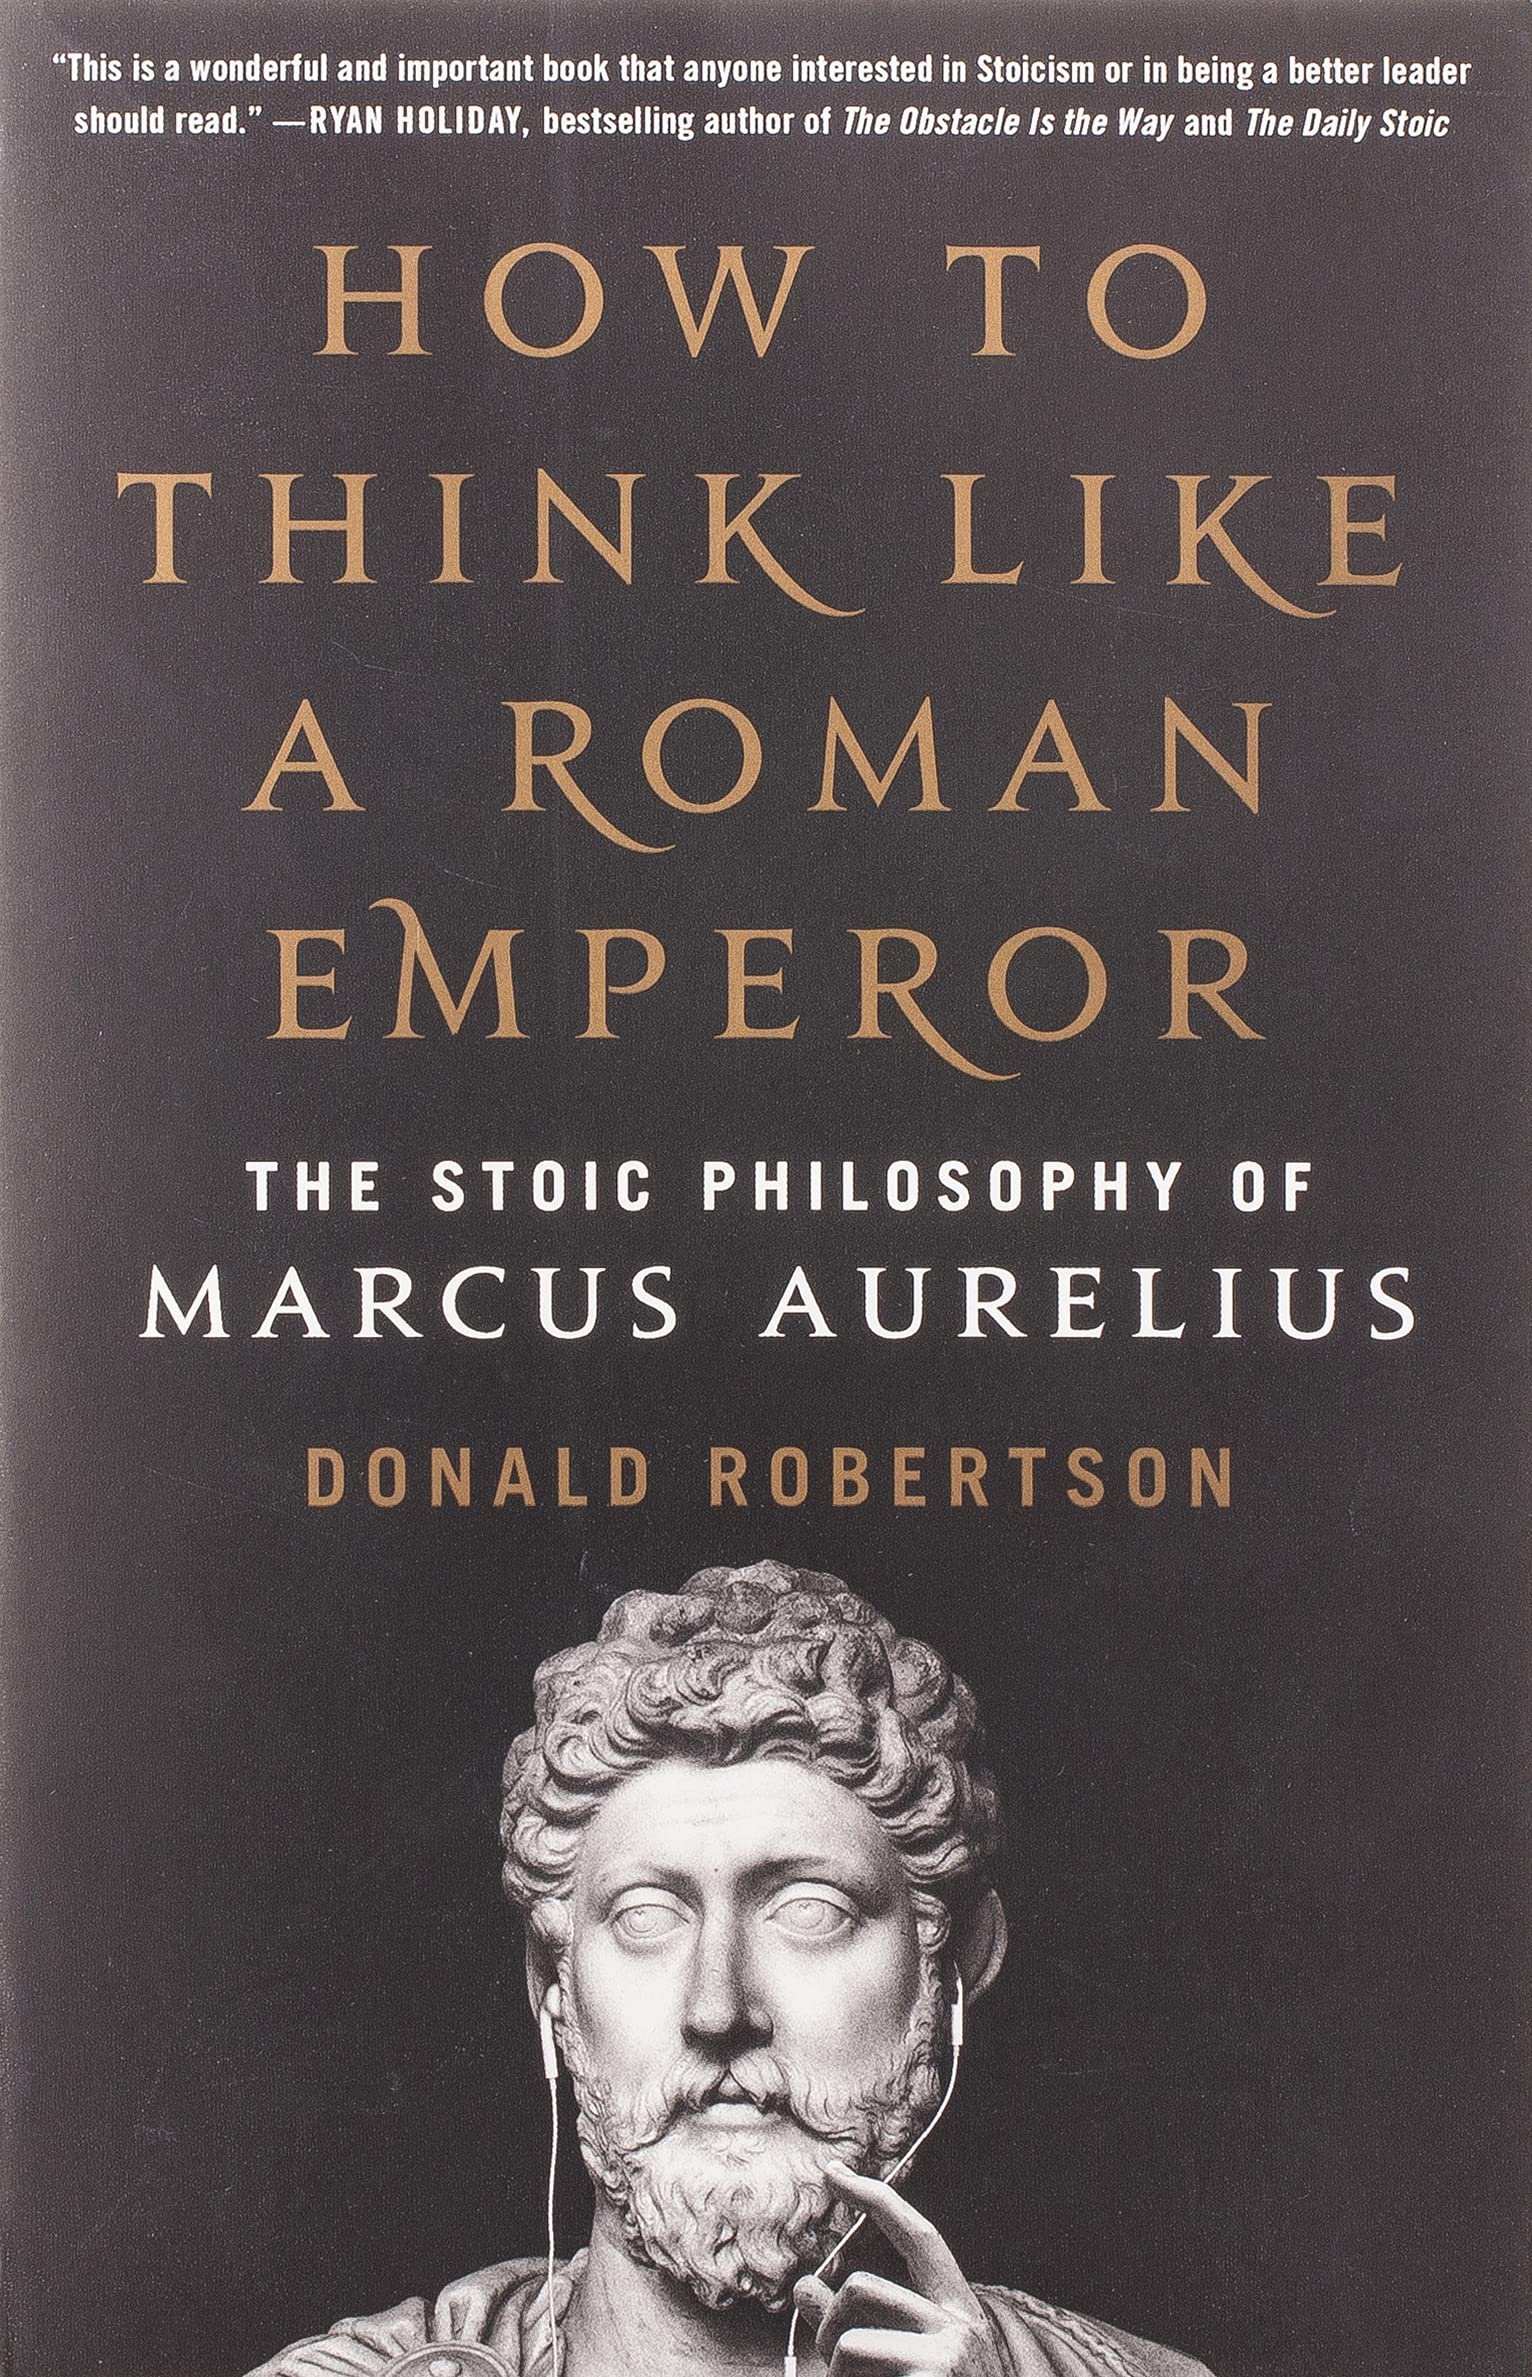 How to Think Like a Roman Emperor.jpeg